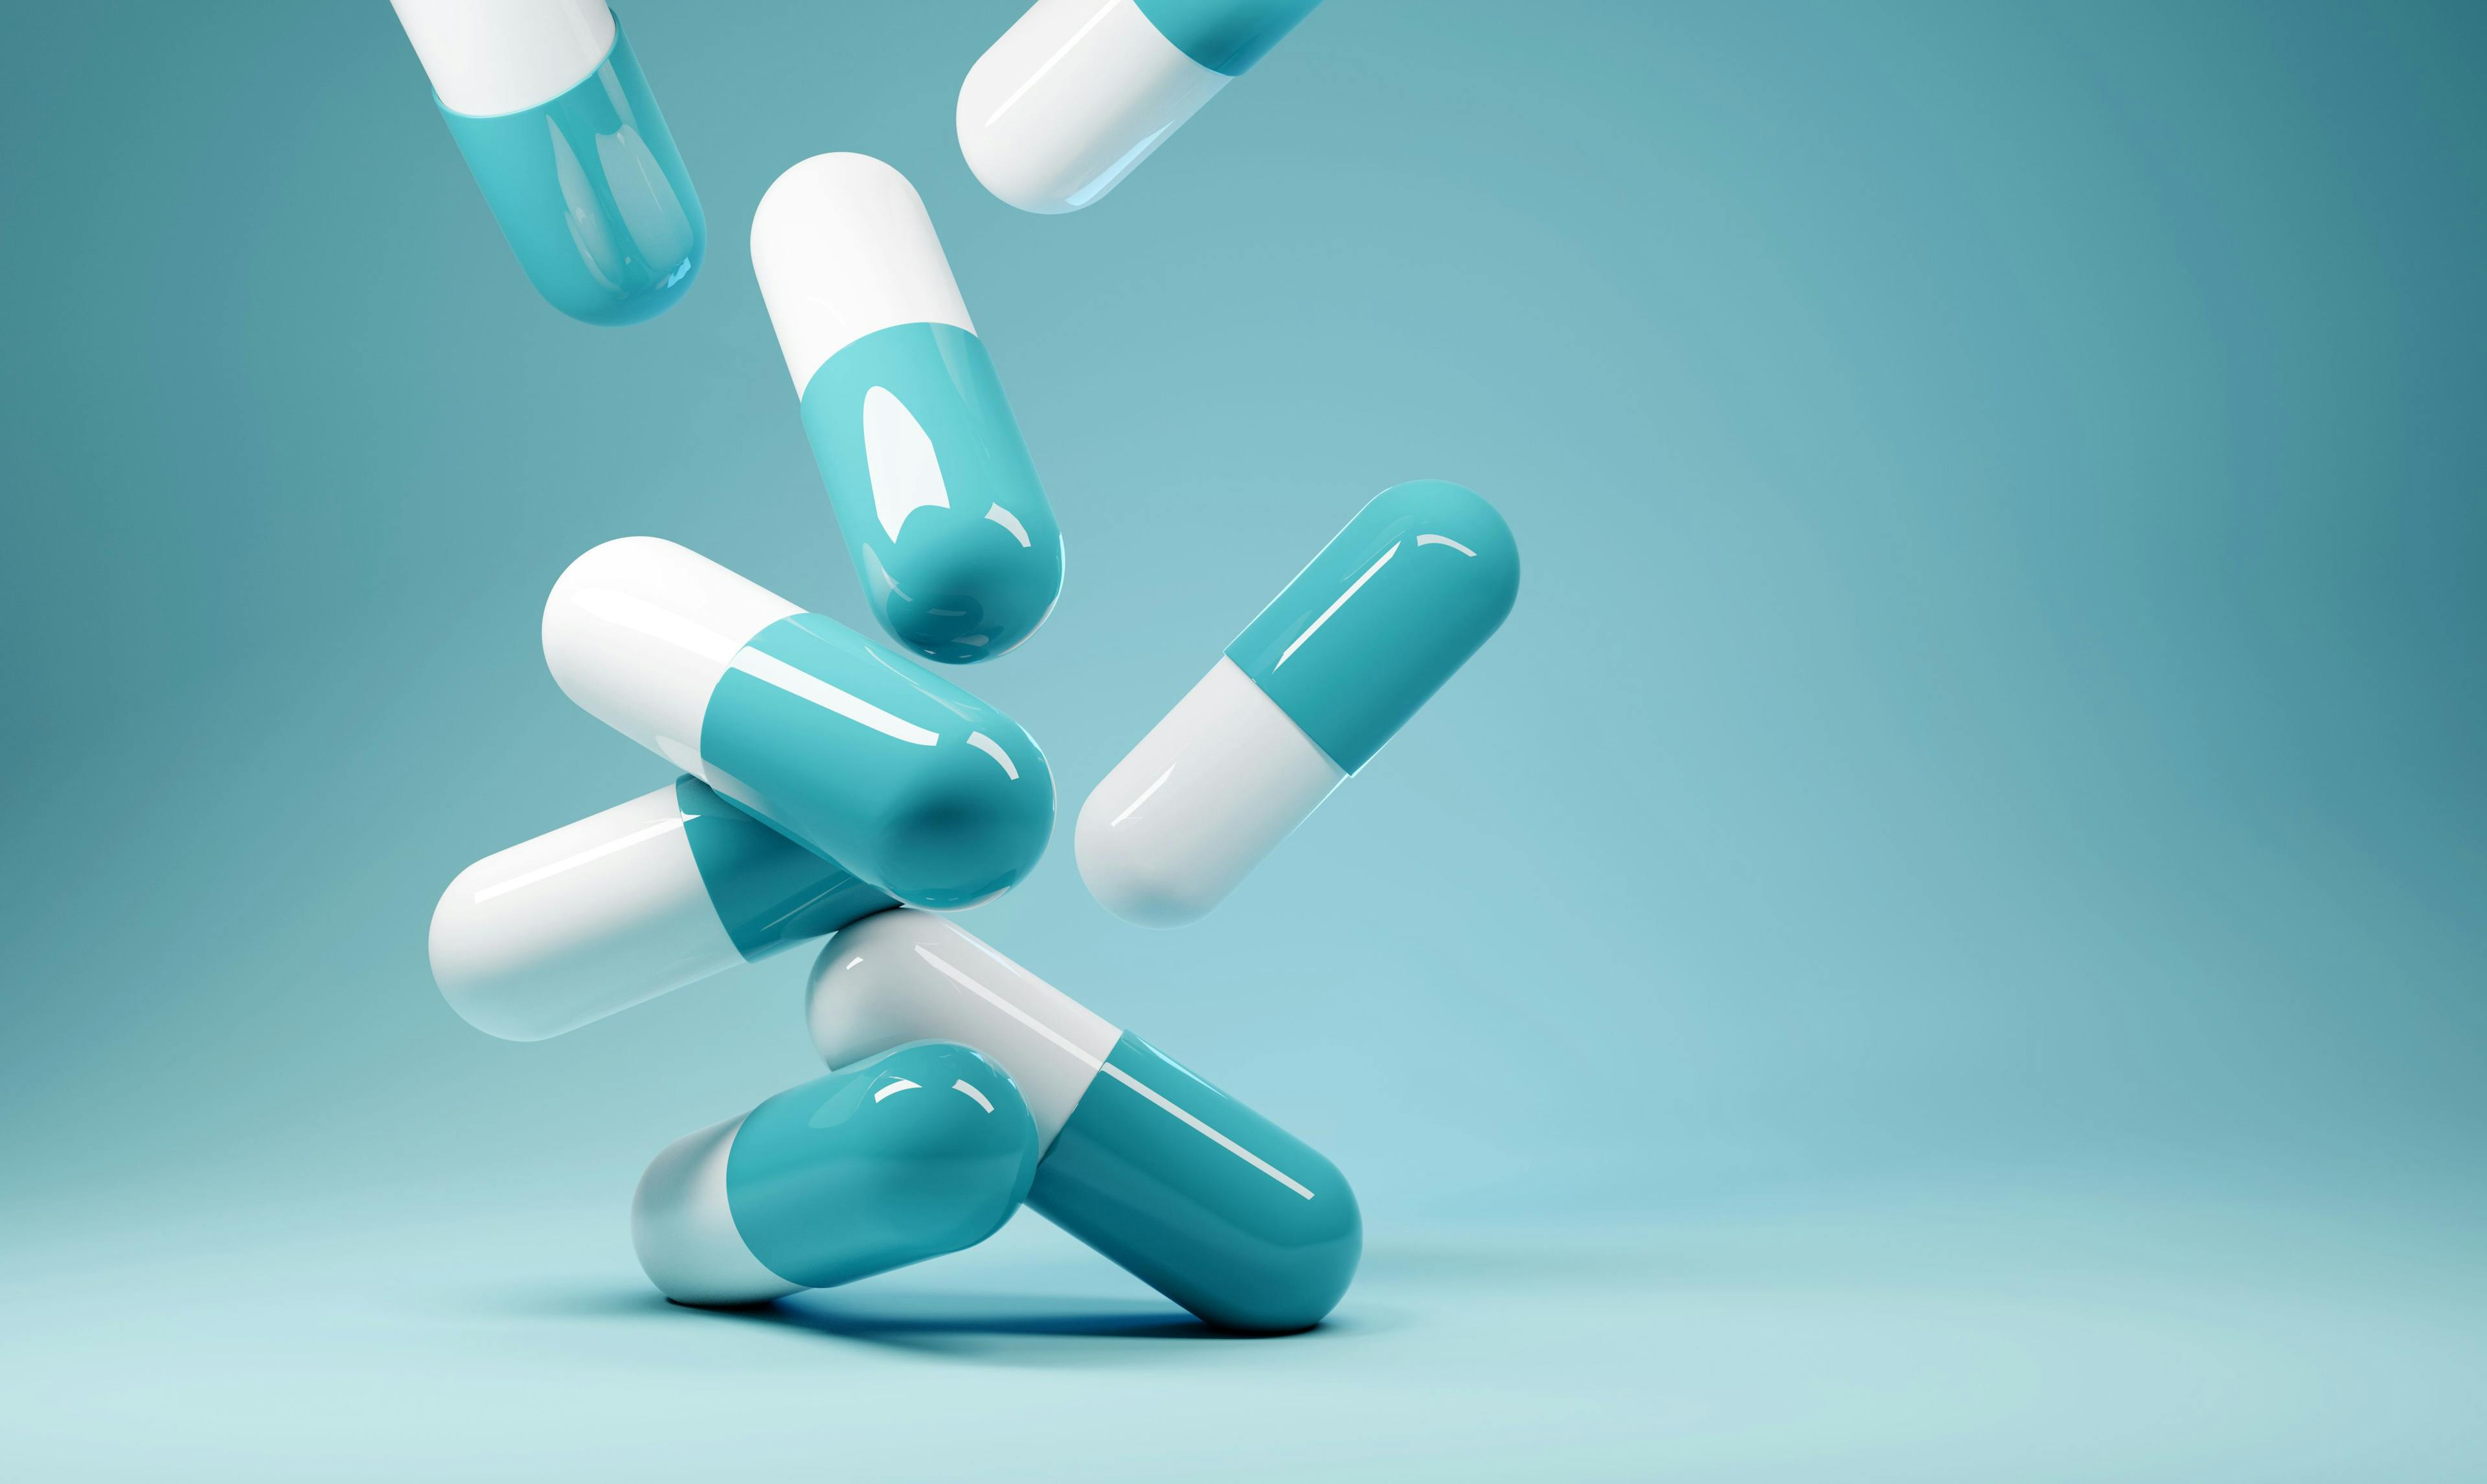 A group of antibiotic pill capsules falling. Healthcare and medical 3D illustration background. | Image Credit: © James Thew - stock.adobe.com